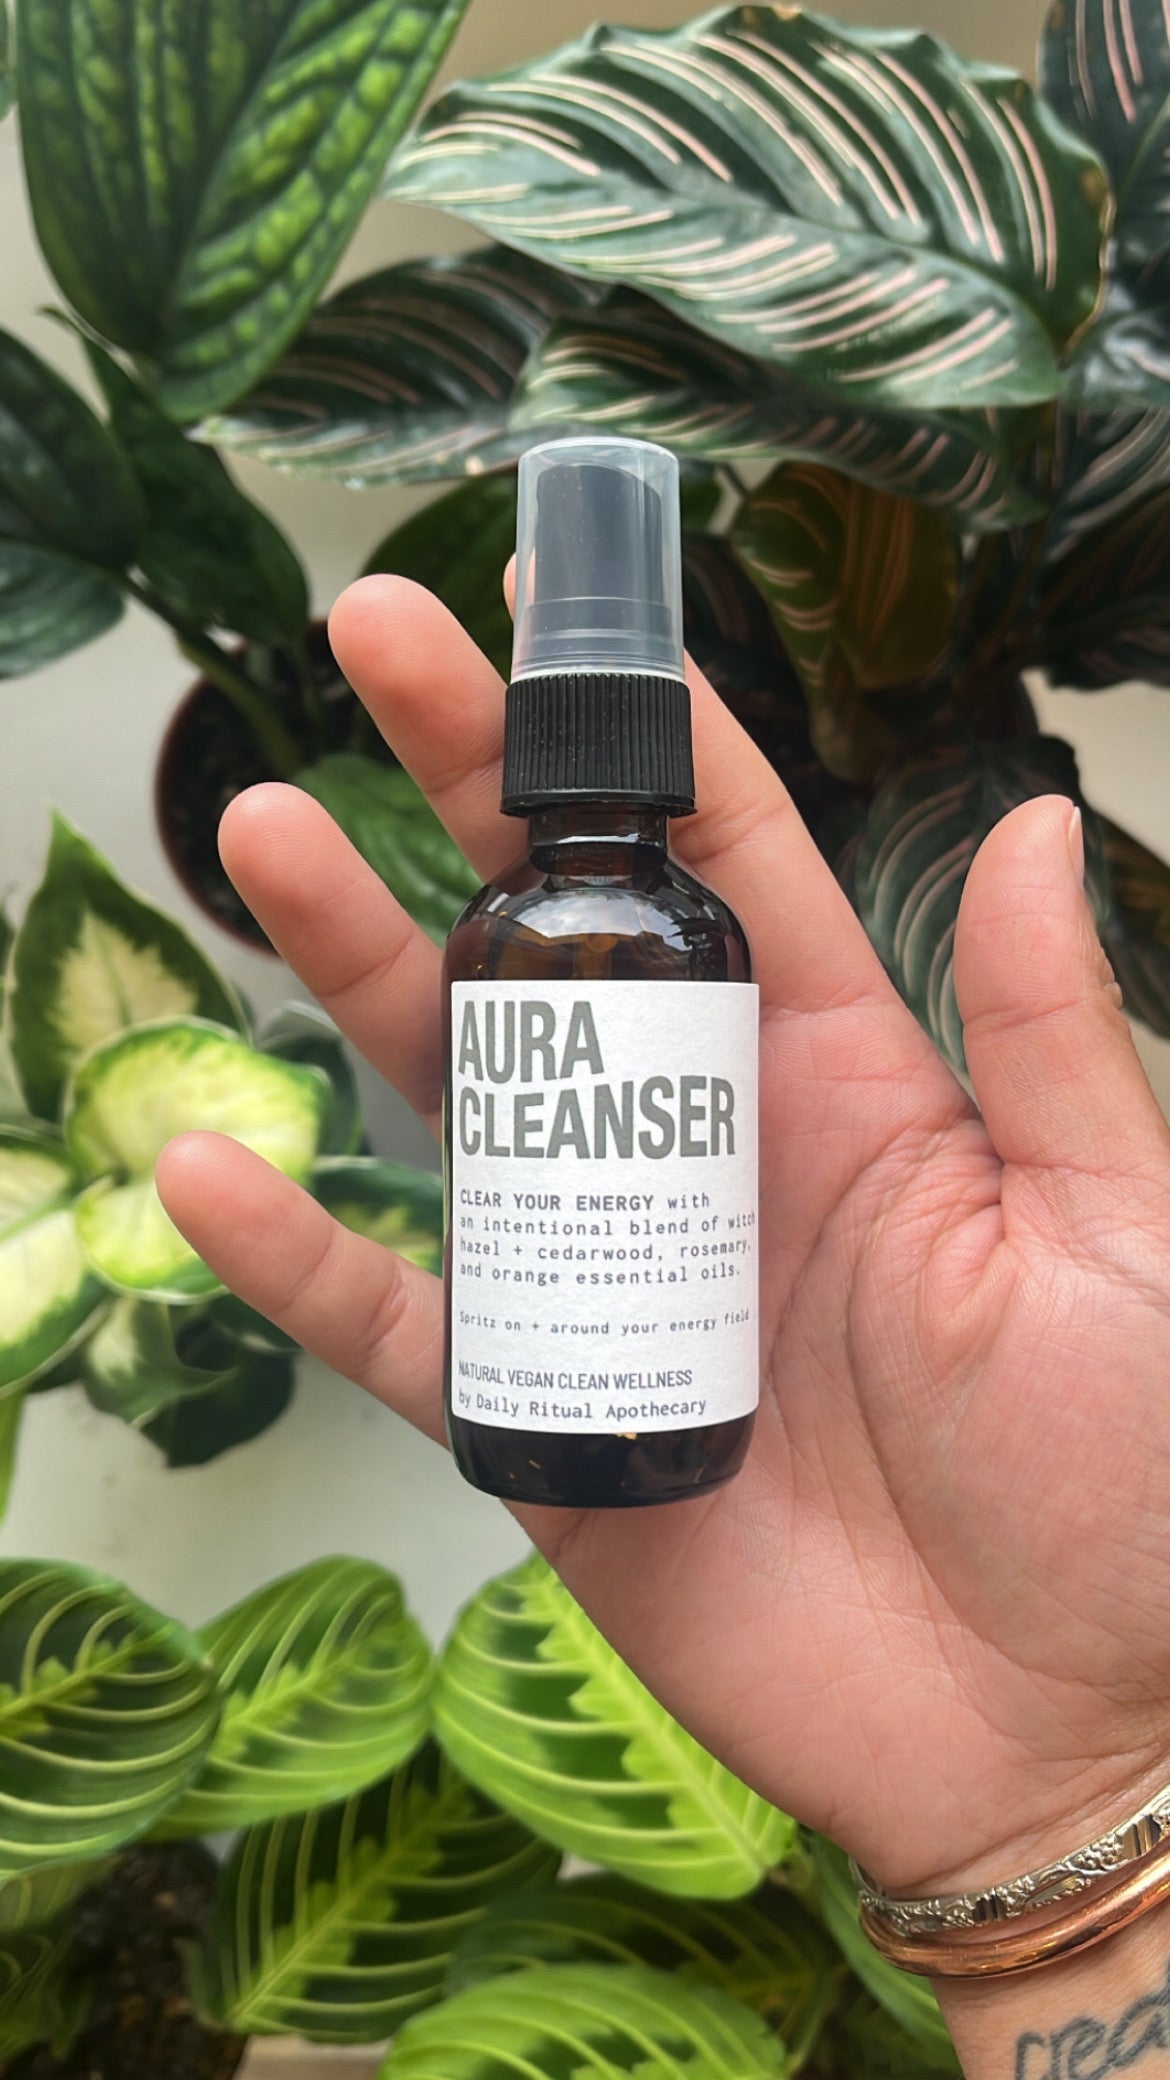 Aura Cleanser Botanical Mist - Daily Ritual Apothecary